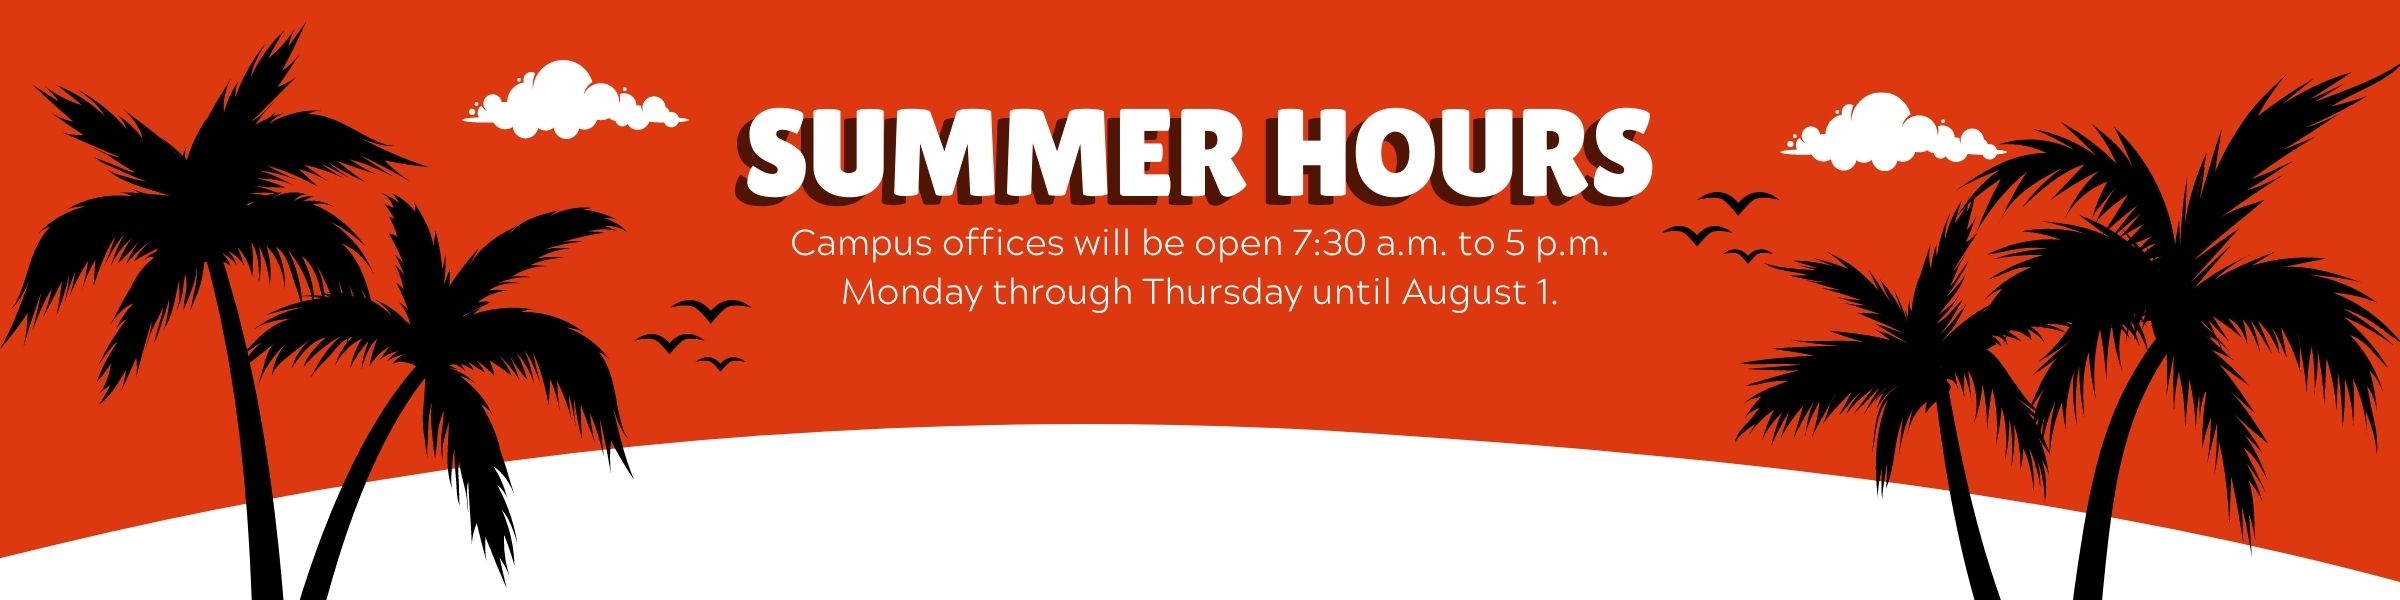 Campus offices will be open 7:30 a.m. to 5 p.m. Monday through Thursday.